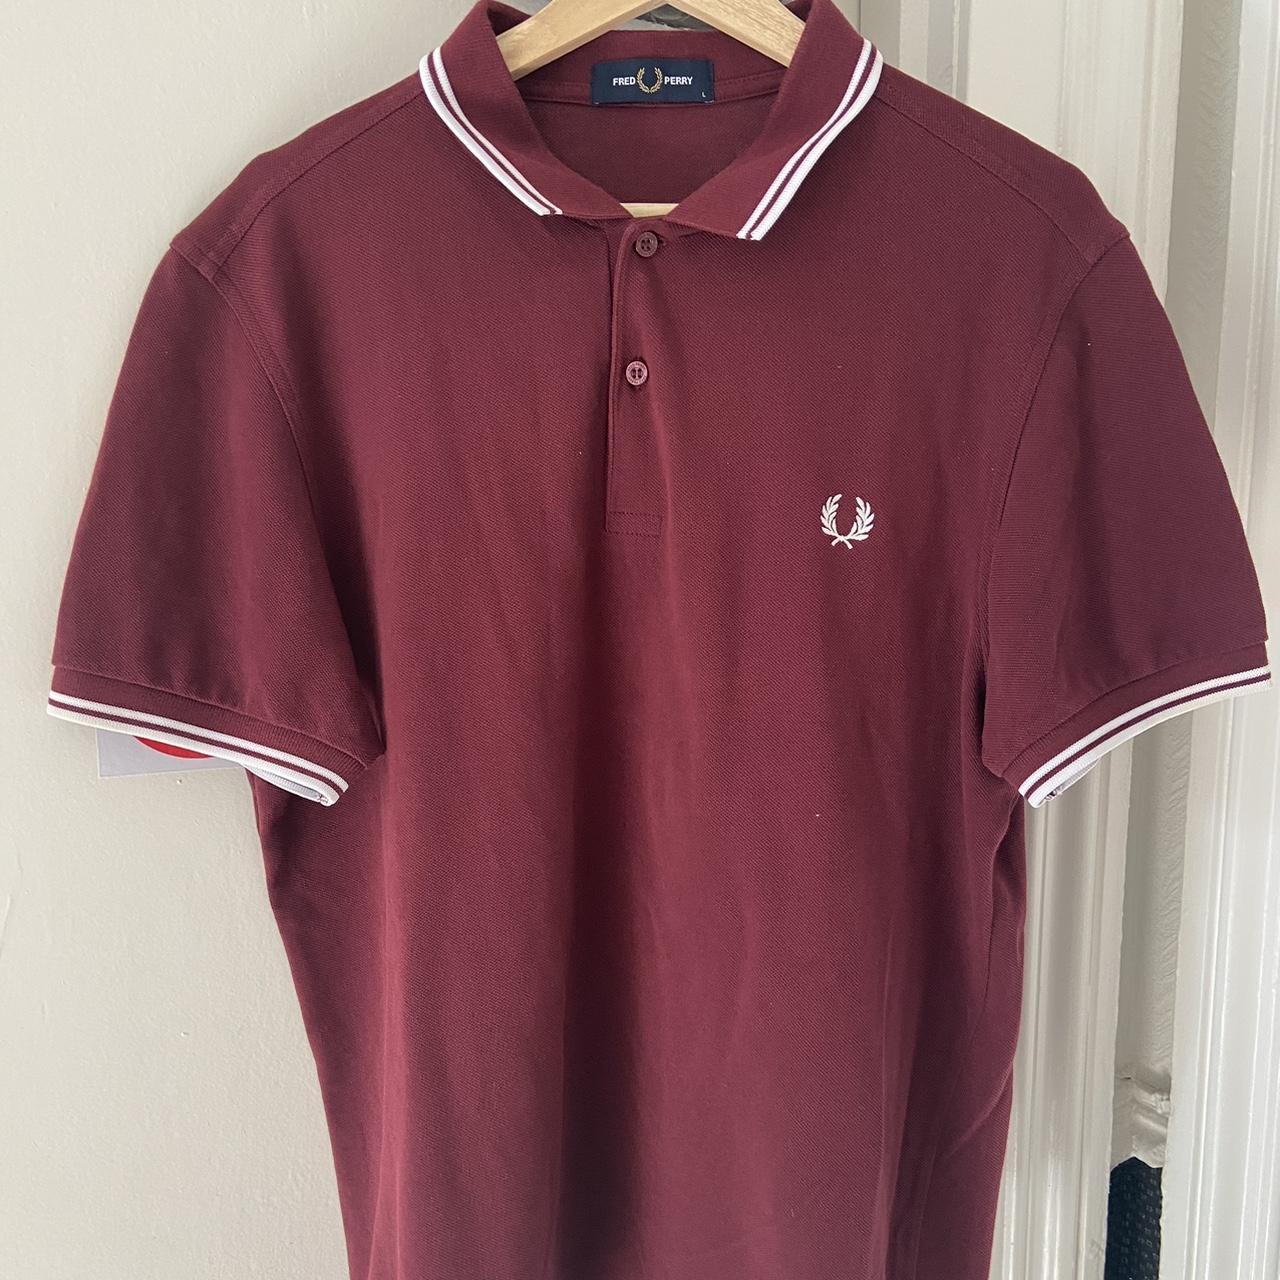 Fred Perry Men's Burgundy and White Polo-shirts | Depop